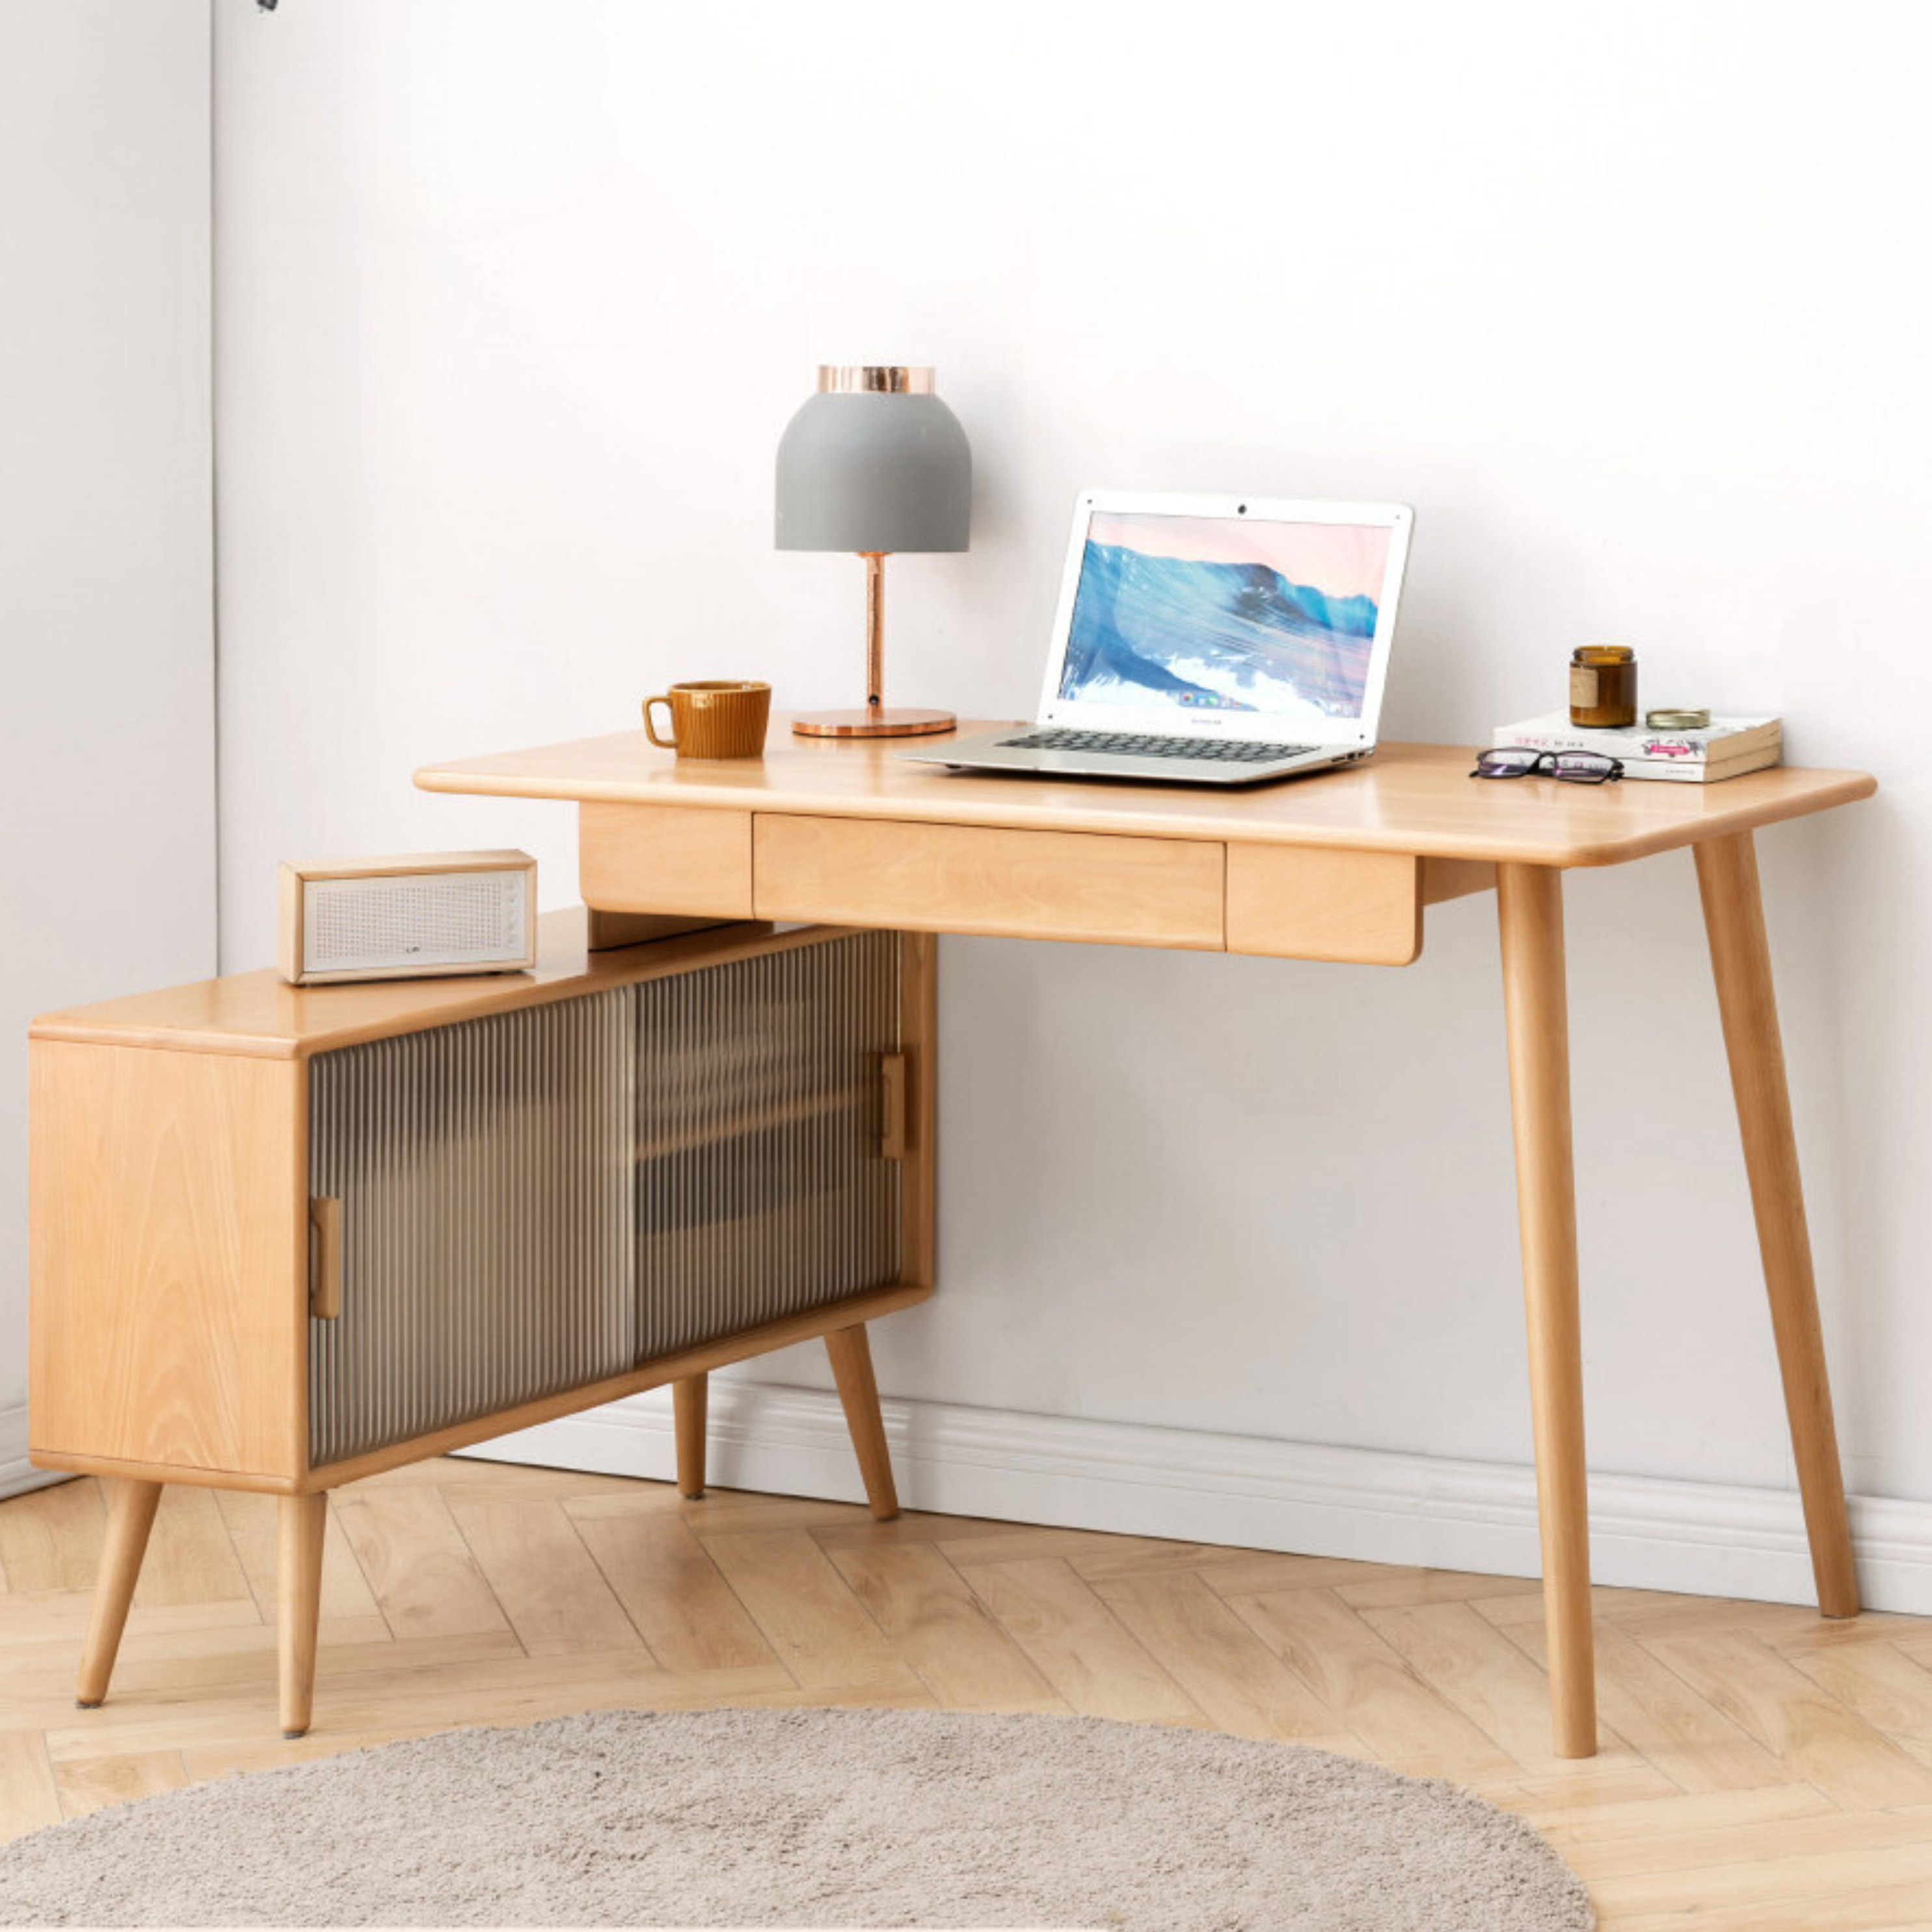 Beech solid wood retractable and adjustable desk with storage combination-